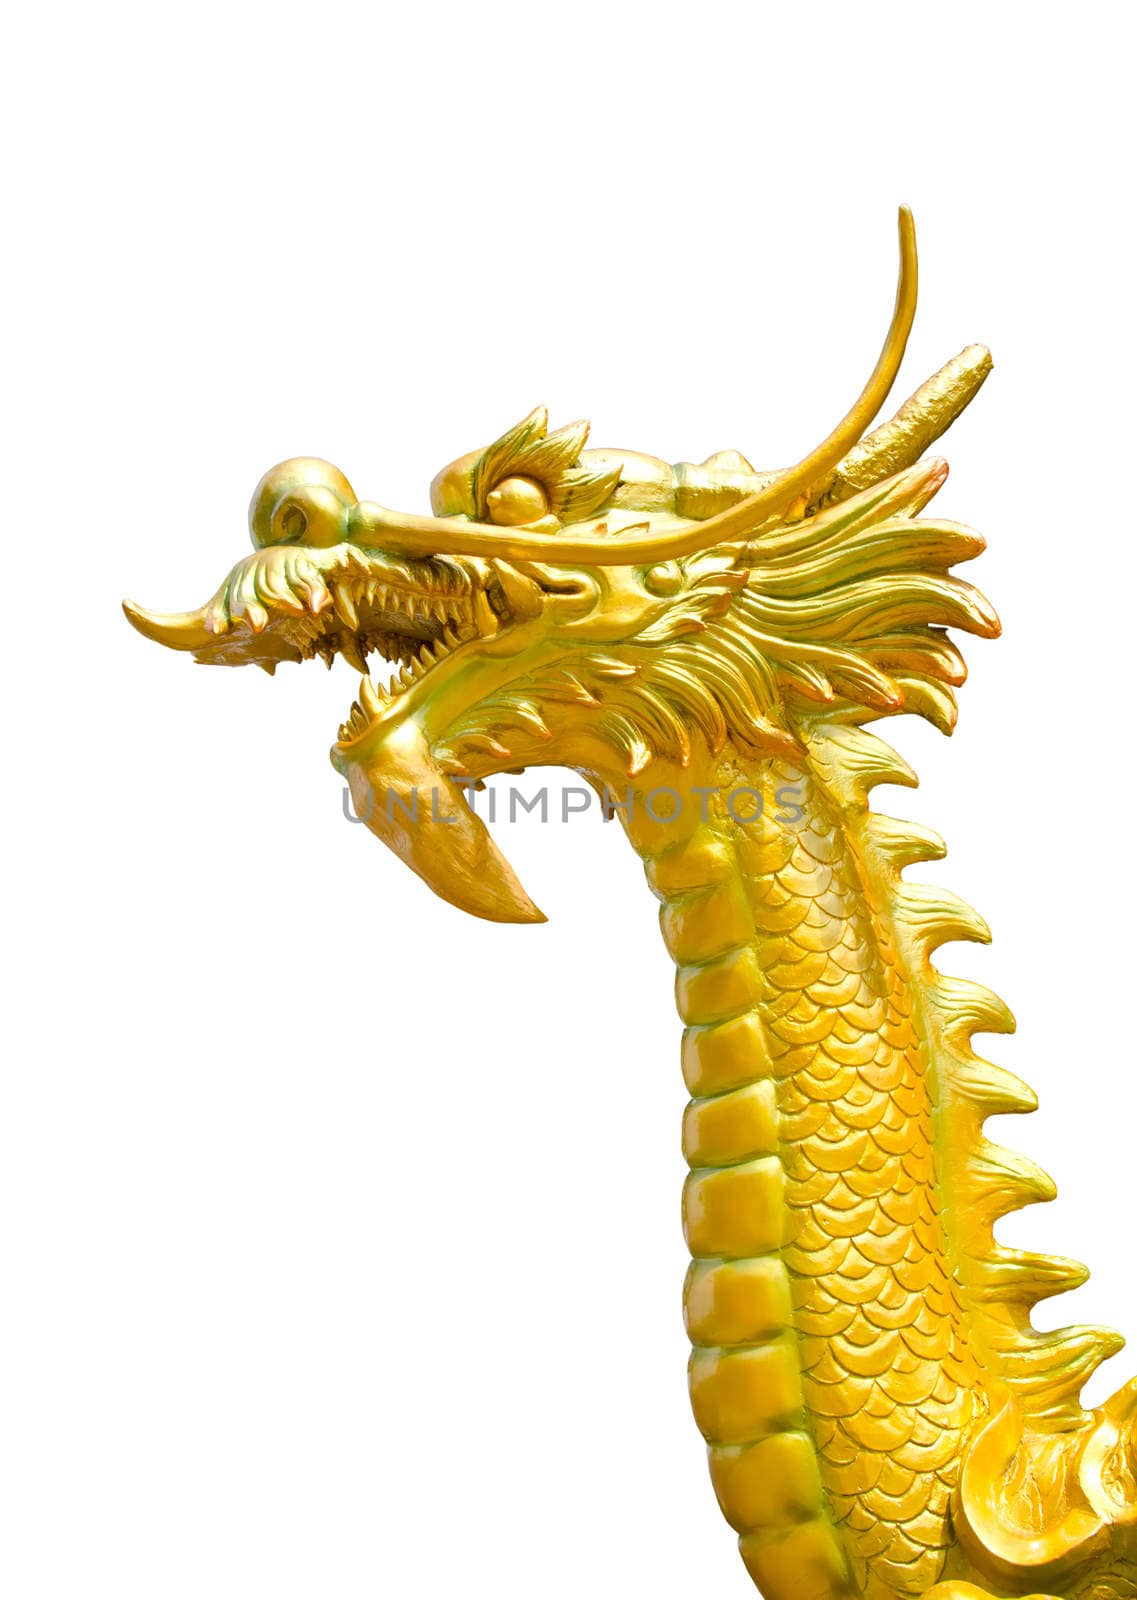 The Head of GoldenDragon statue isolated on white background. by Gamjai